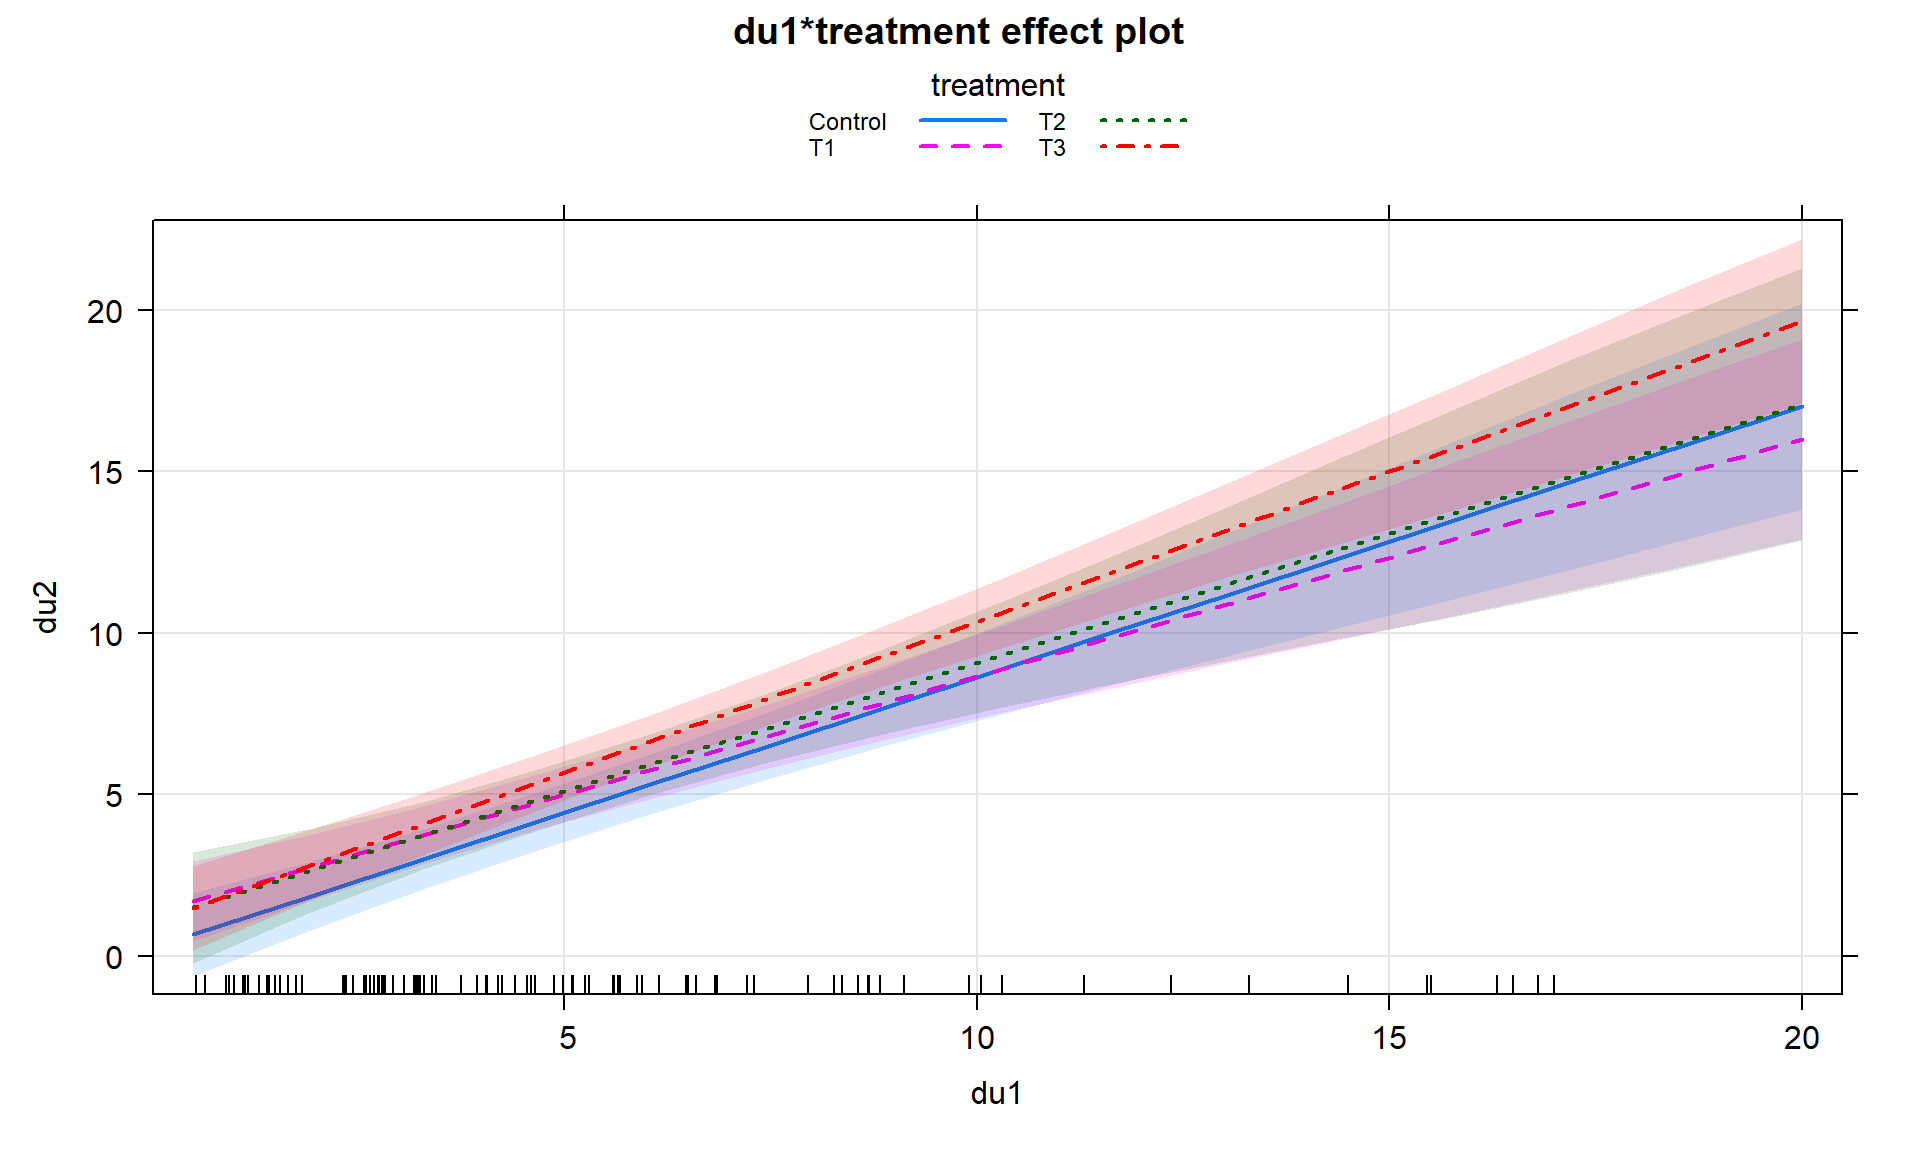 Term-plot for decibel tolerance interaction model (version 2). This plot is not printed in color because it is impossible to distinguish the four groups whether in color or black and white, although the lty = c(1:4) that provides four different line types does help a bit.